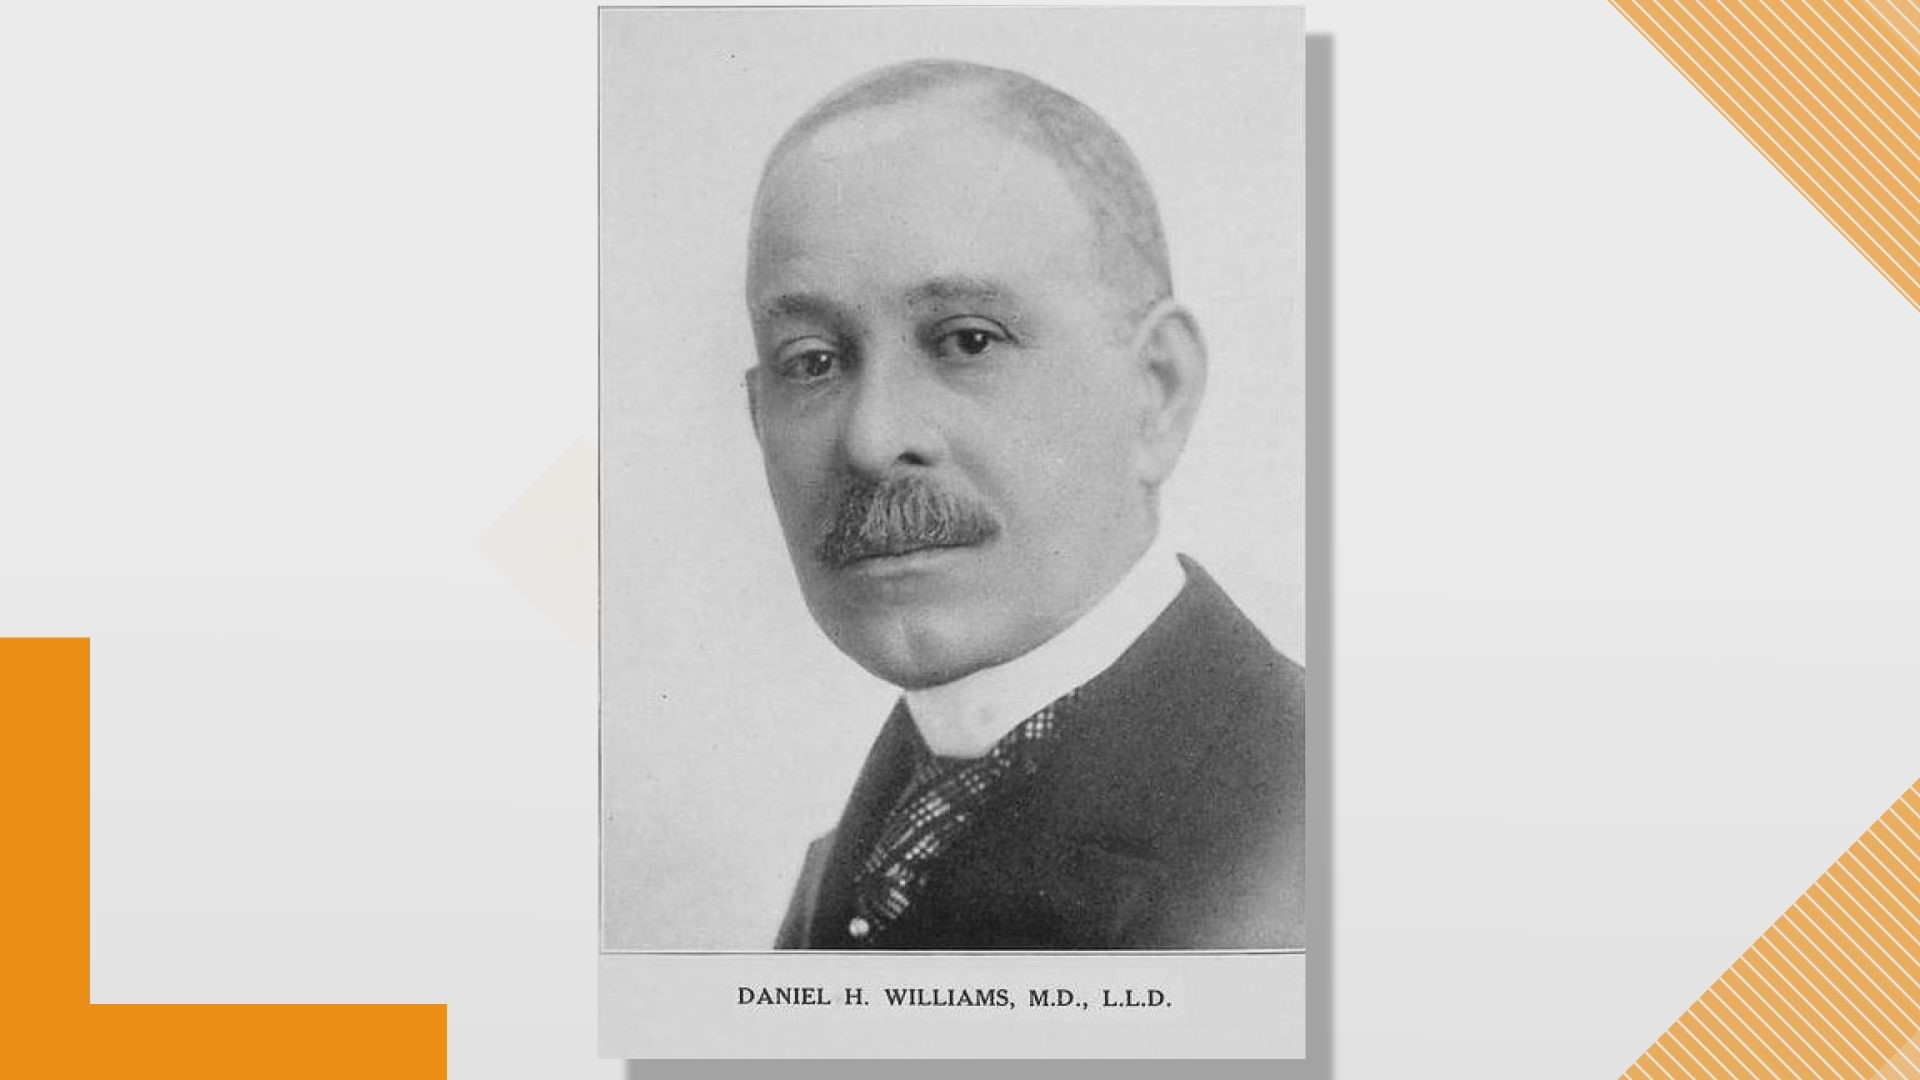 Kristen's Kudos & Quote of the Day highlight Dr. Daniel Hale Williams, who completed the first successful heart surgery. Black History Month